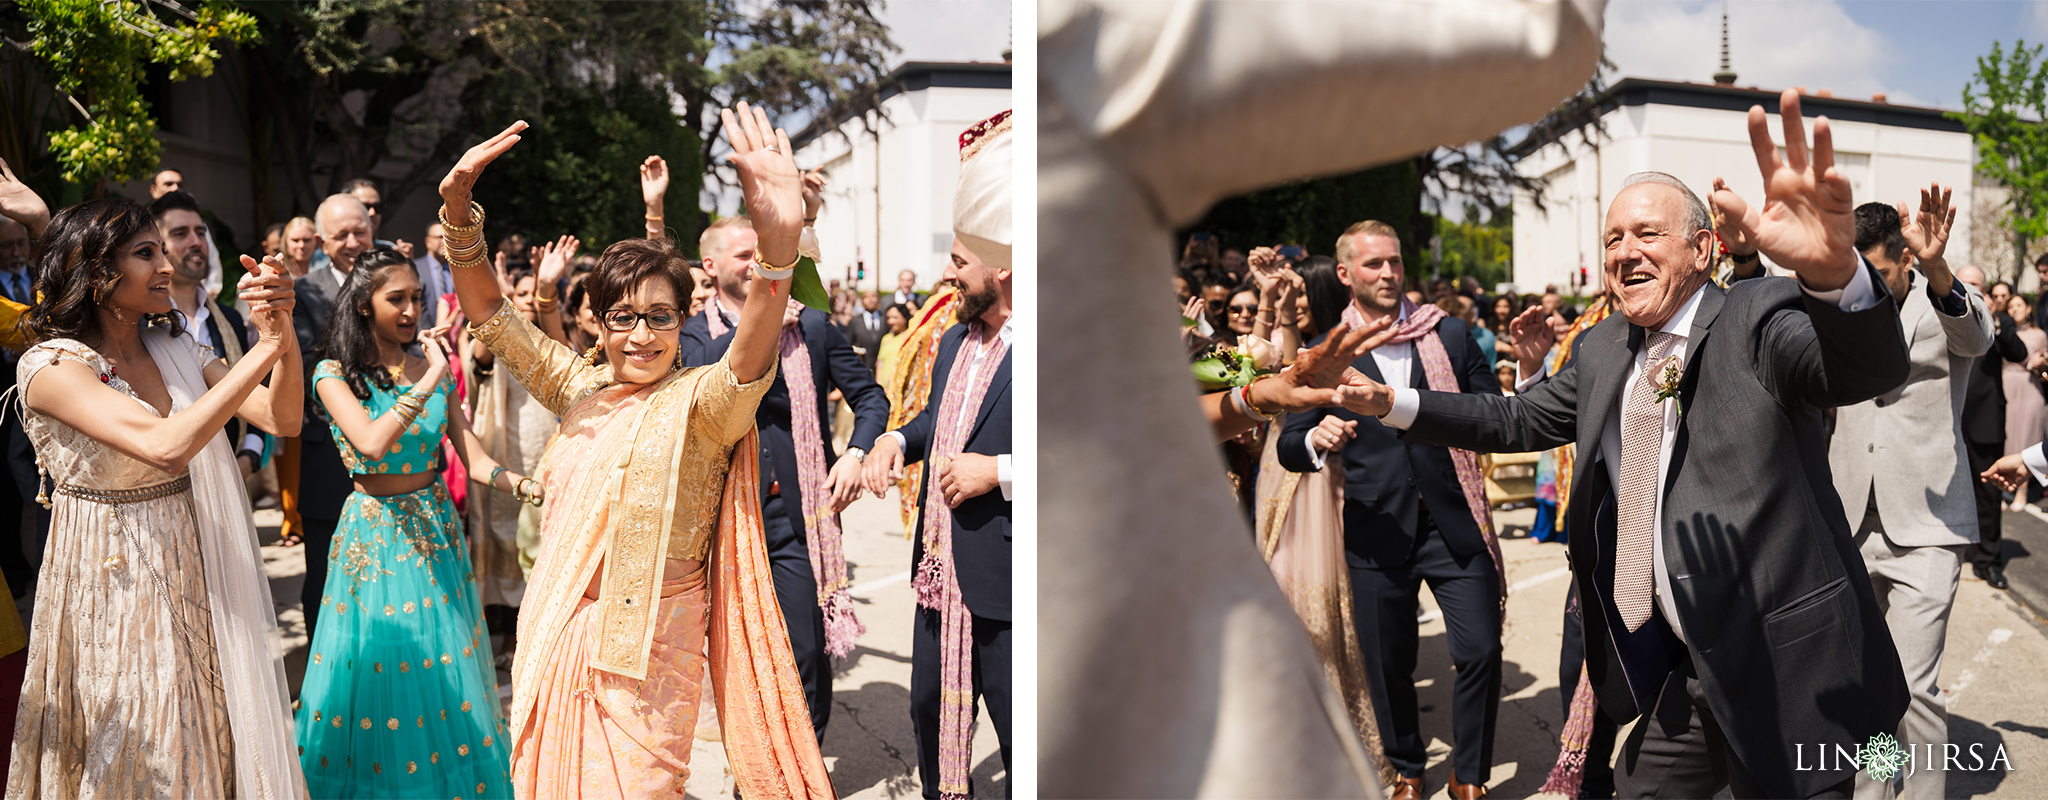 16 The Ebell Los Angeles Indian Wedding Baraat Photography